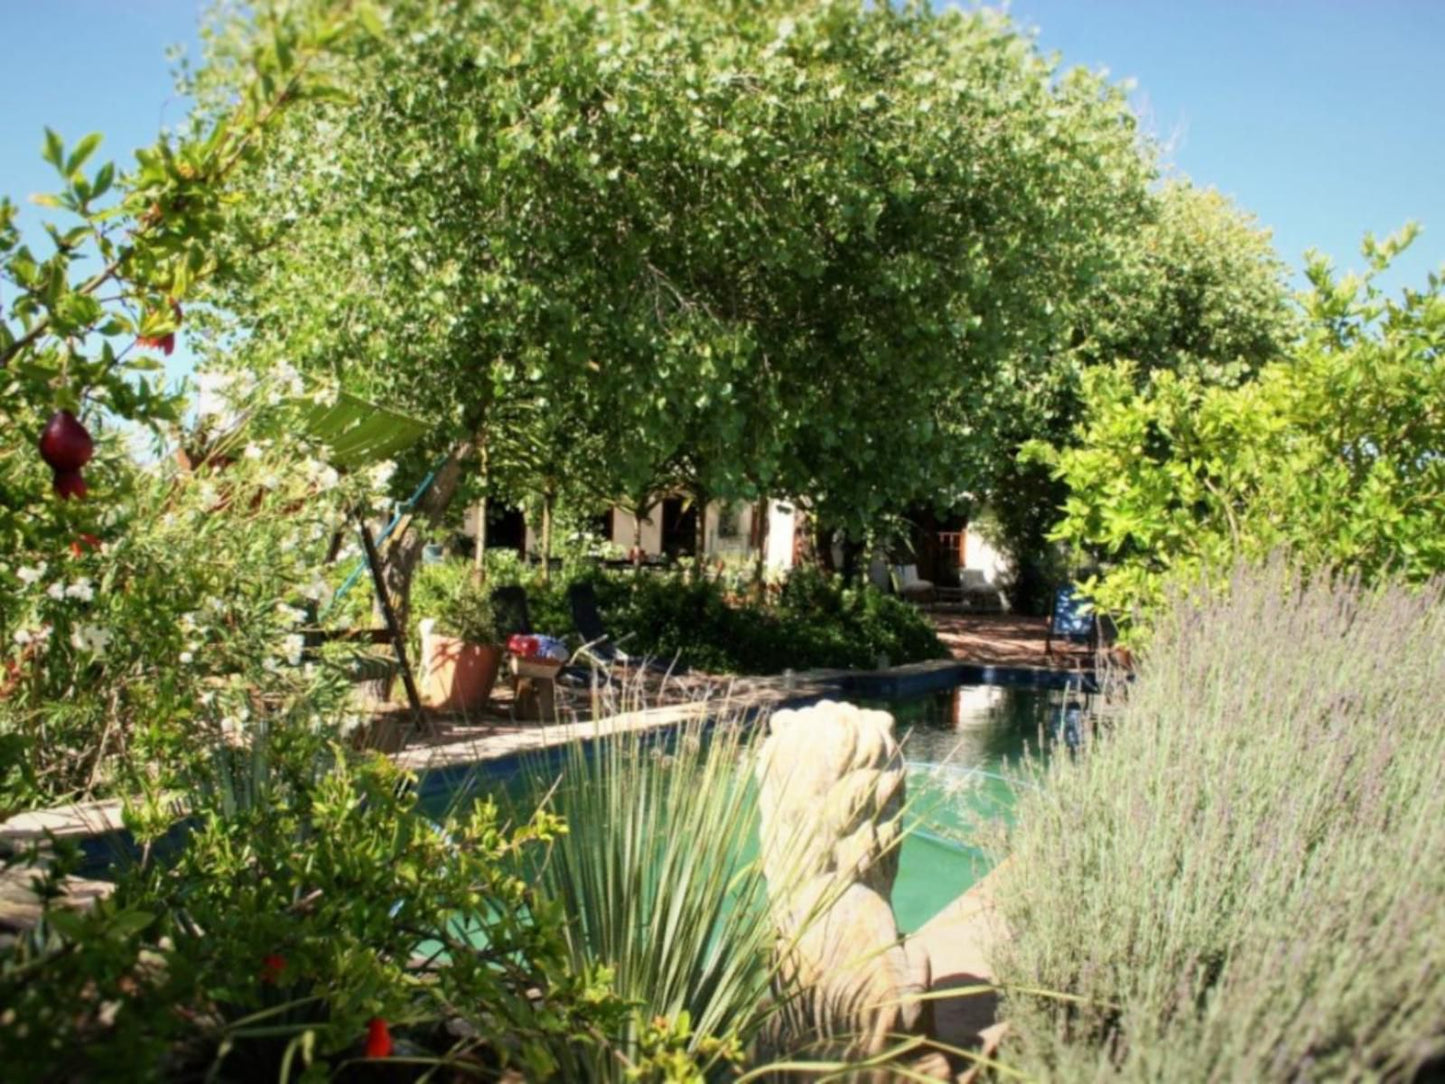 Boerfontein Paarl Farms Paarl Western Cape South Africa Plant, Nature, Garden, Swimming Pool